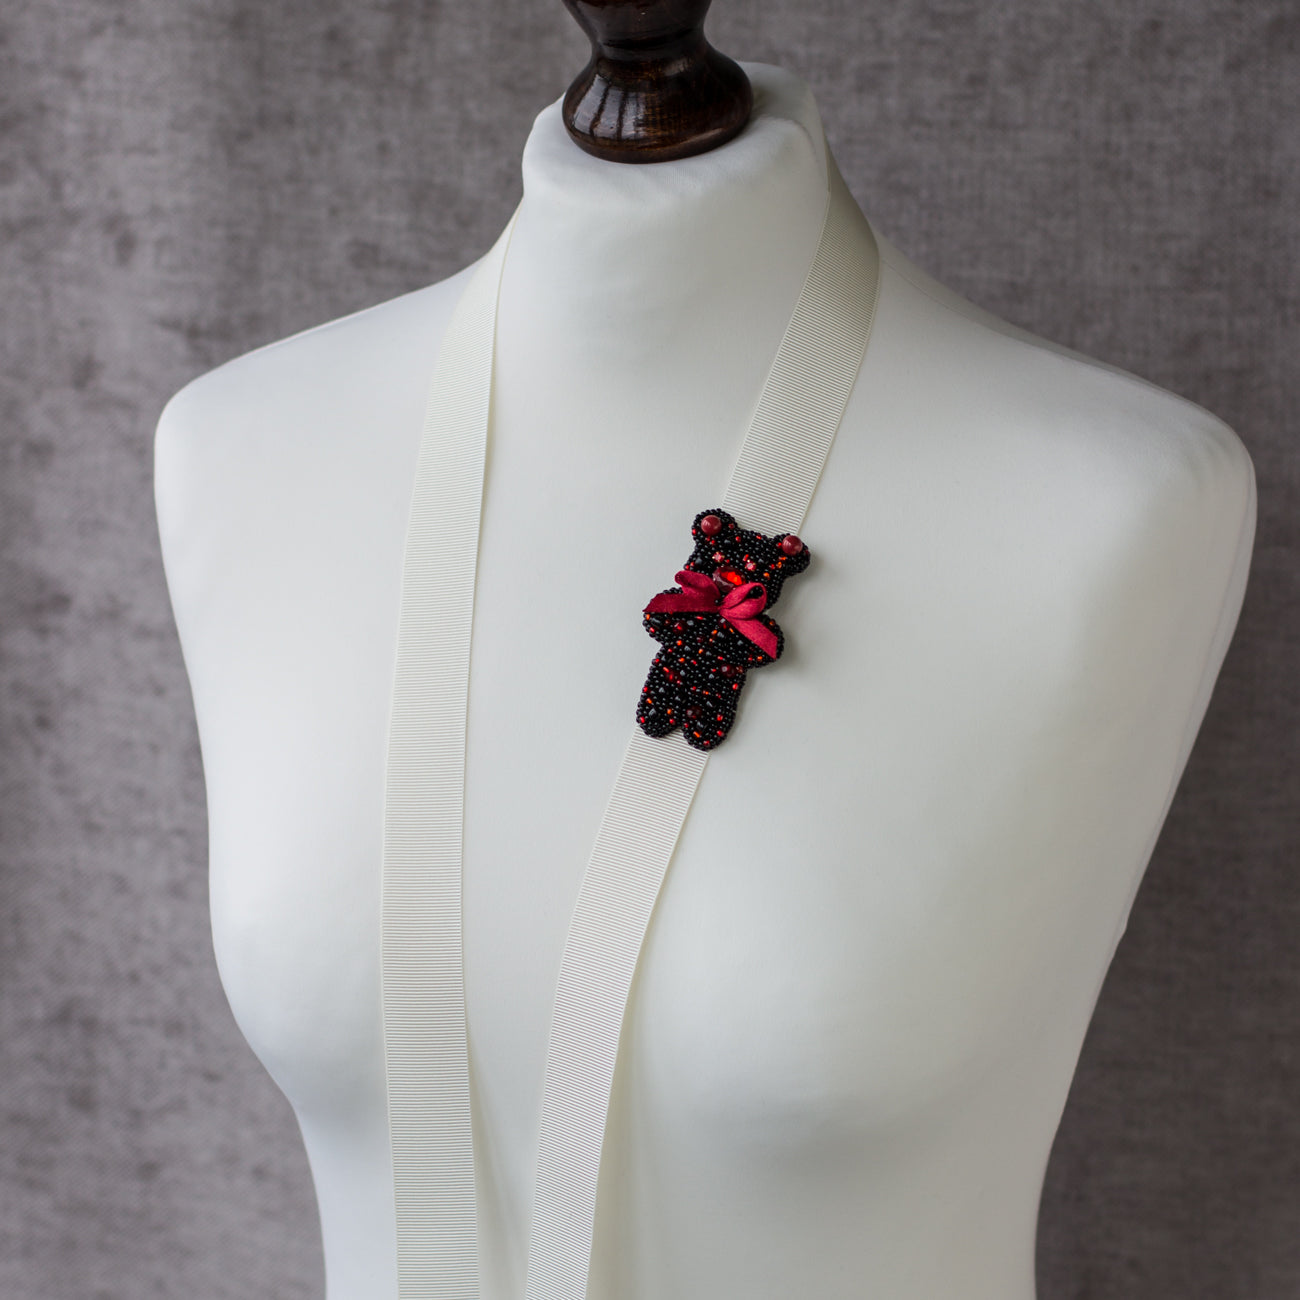 Find the perfect accessories at  LeFlowers Bijouterie. Playful brooch. Black& red bear brooch. Teddy bear accessories. Kids accessories. Brooch for kids